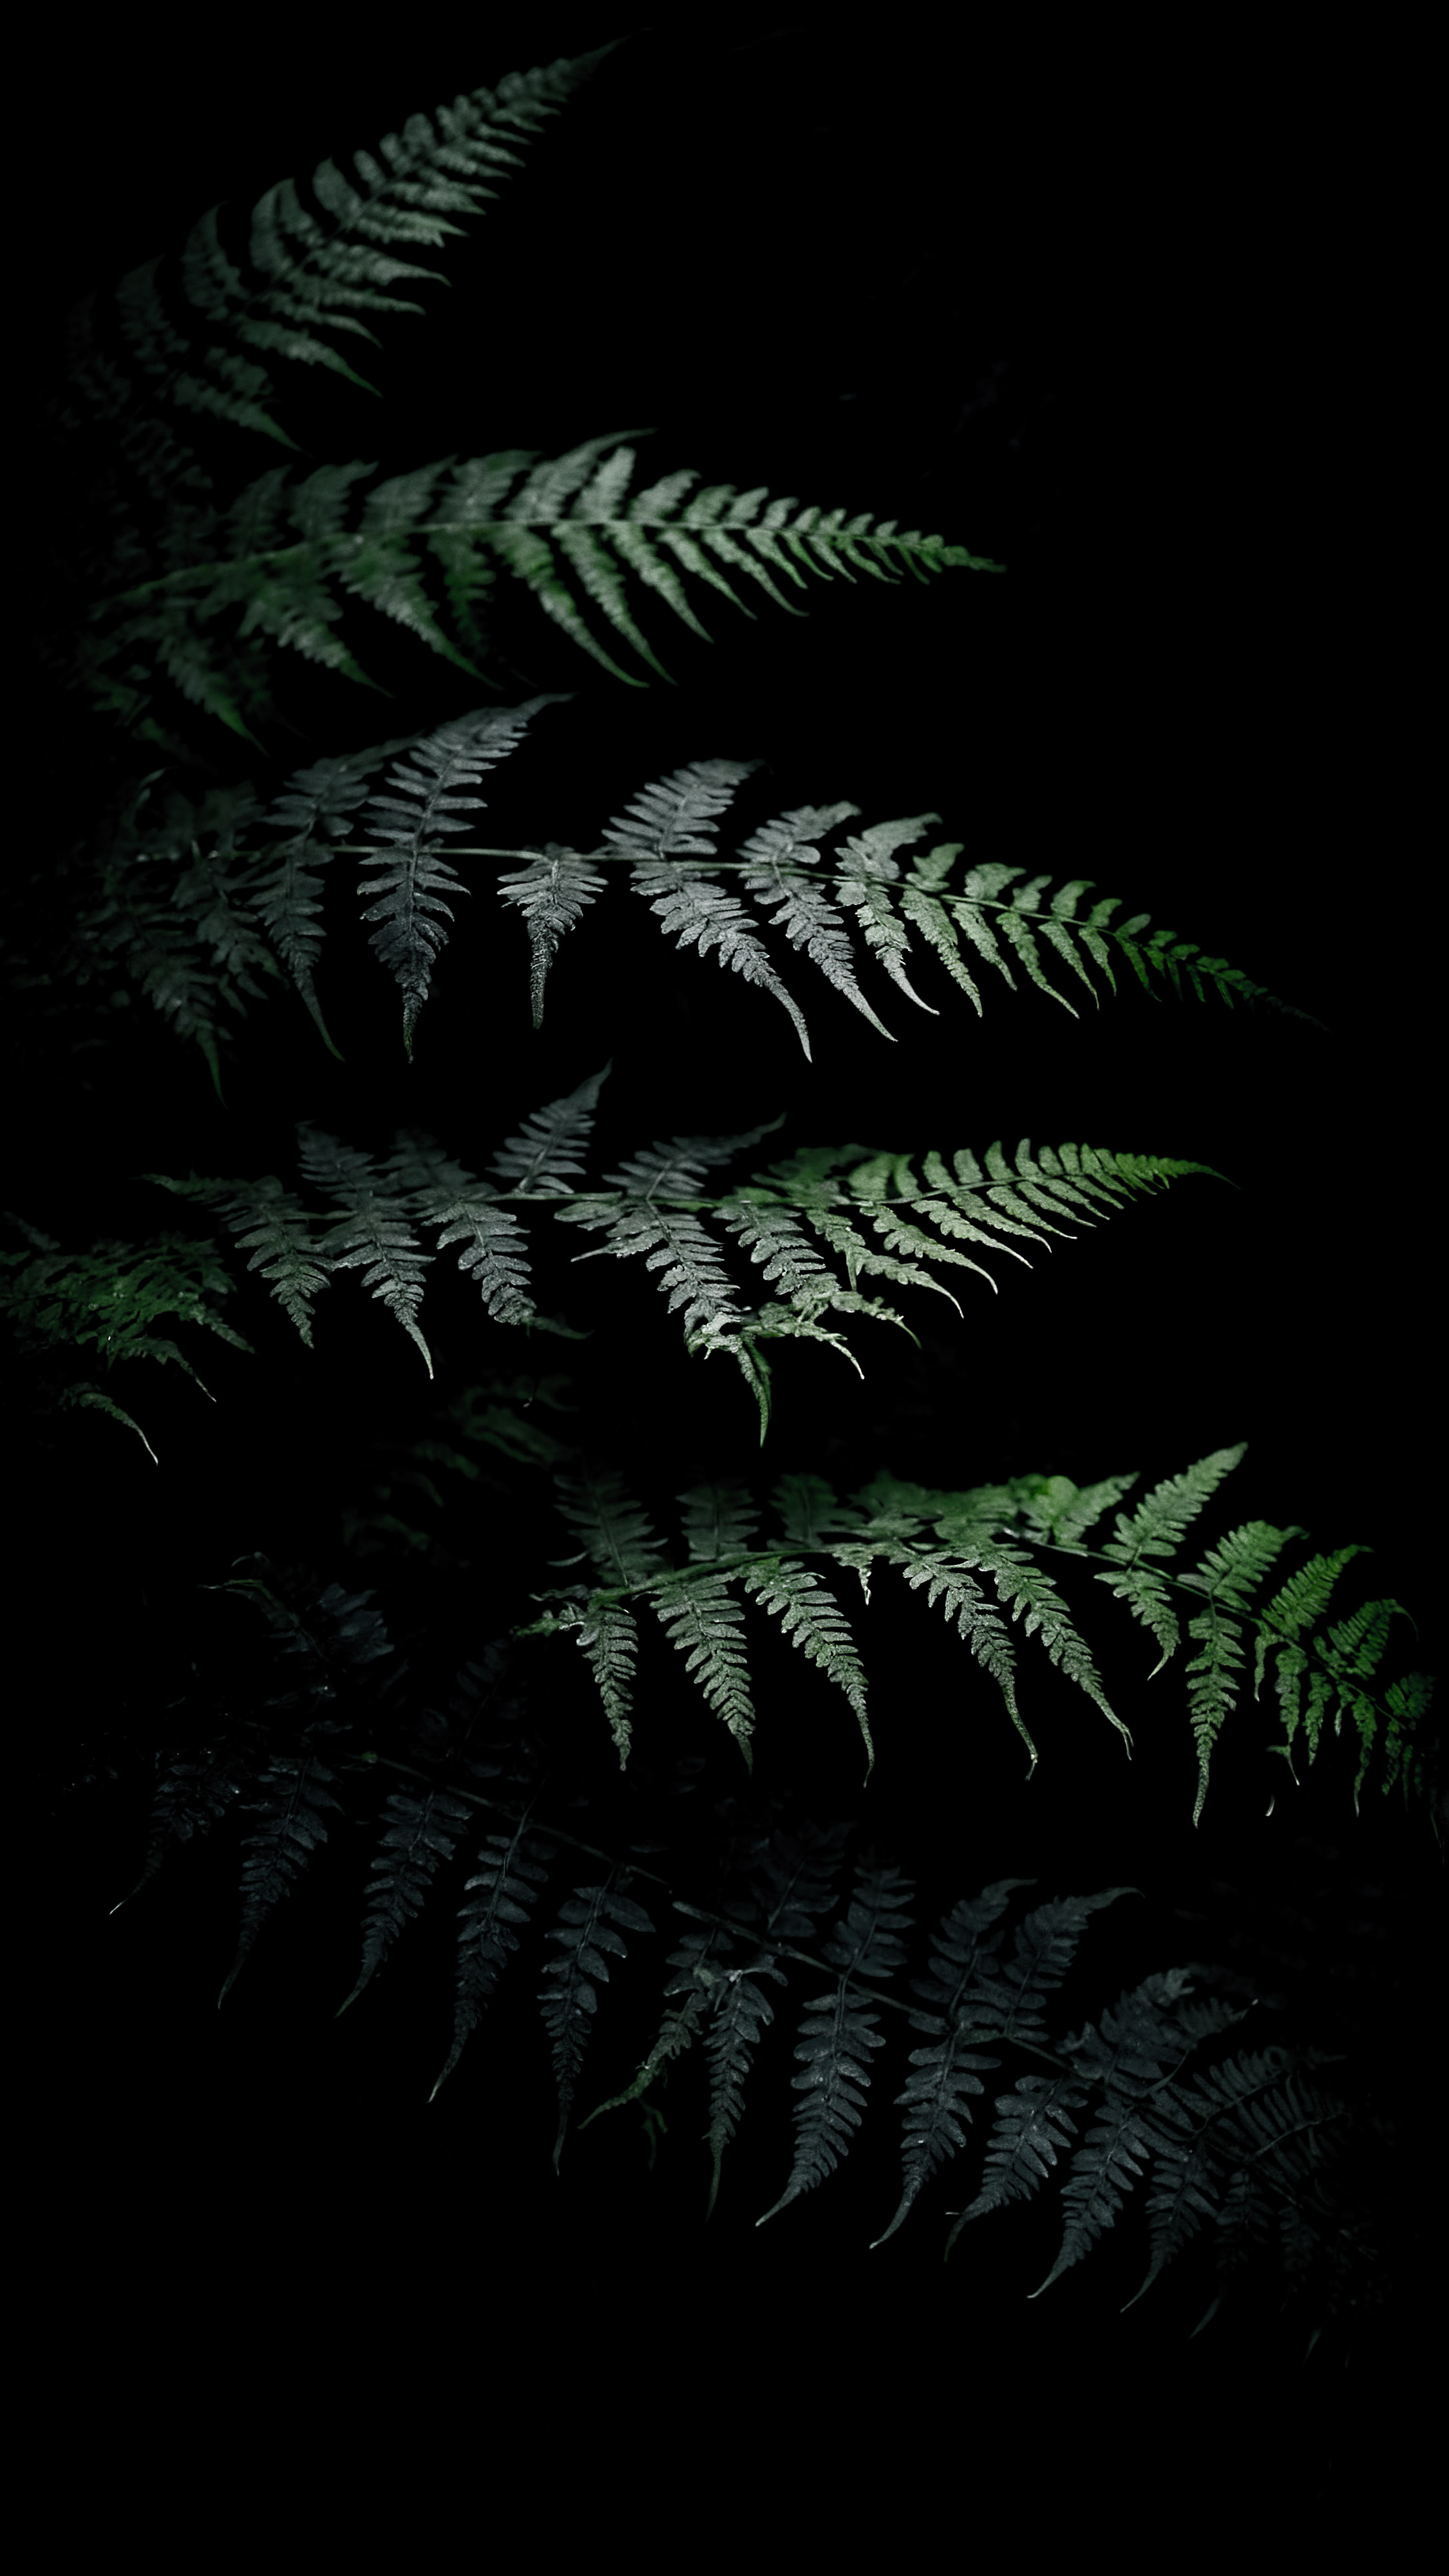 Immerse yourself in the atmospheric effect of a black theme iPhone wallpaper, highlighting the dark silhouette of fern leaves against a black background.